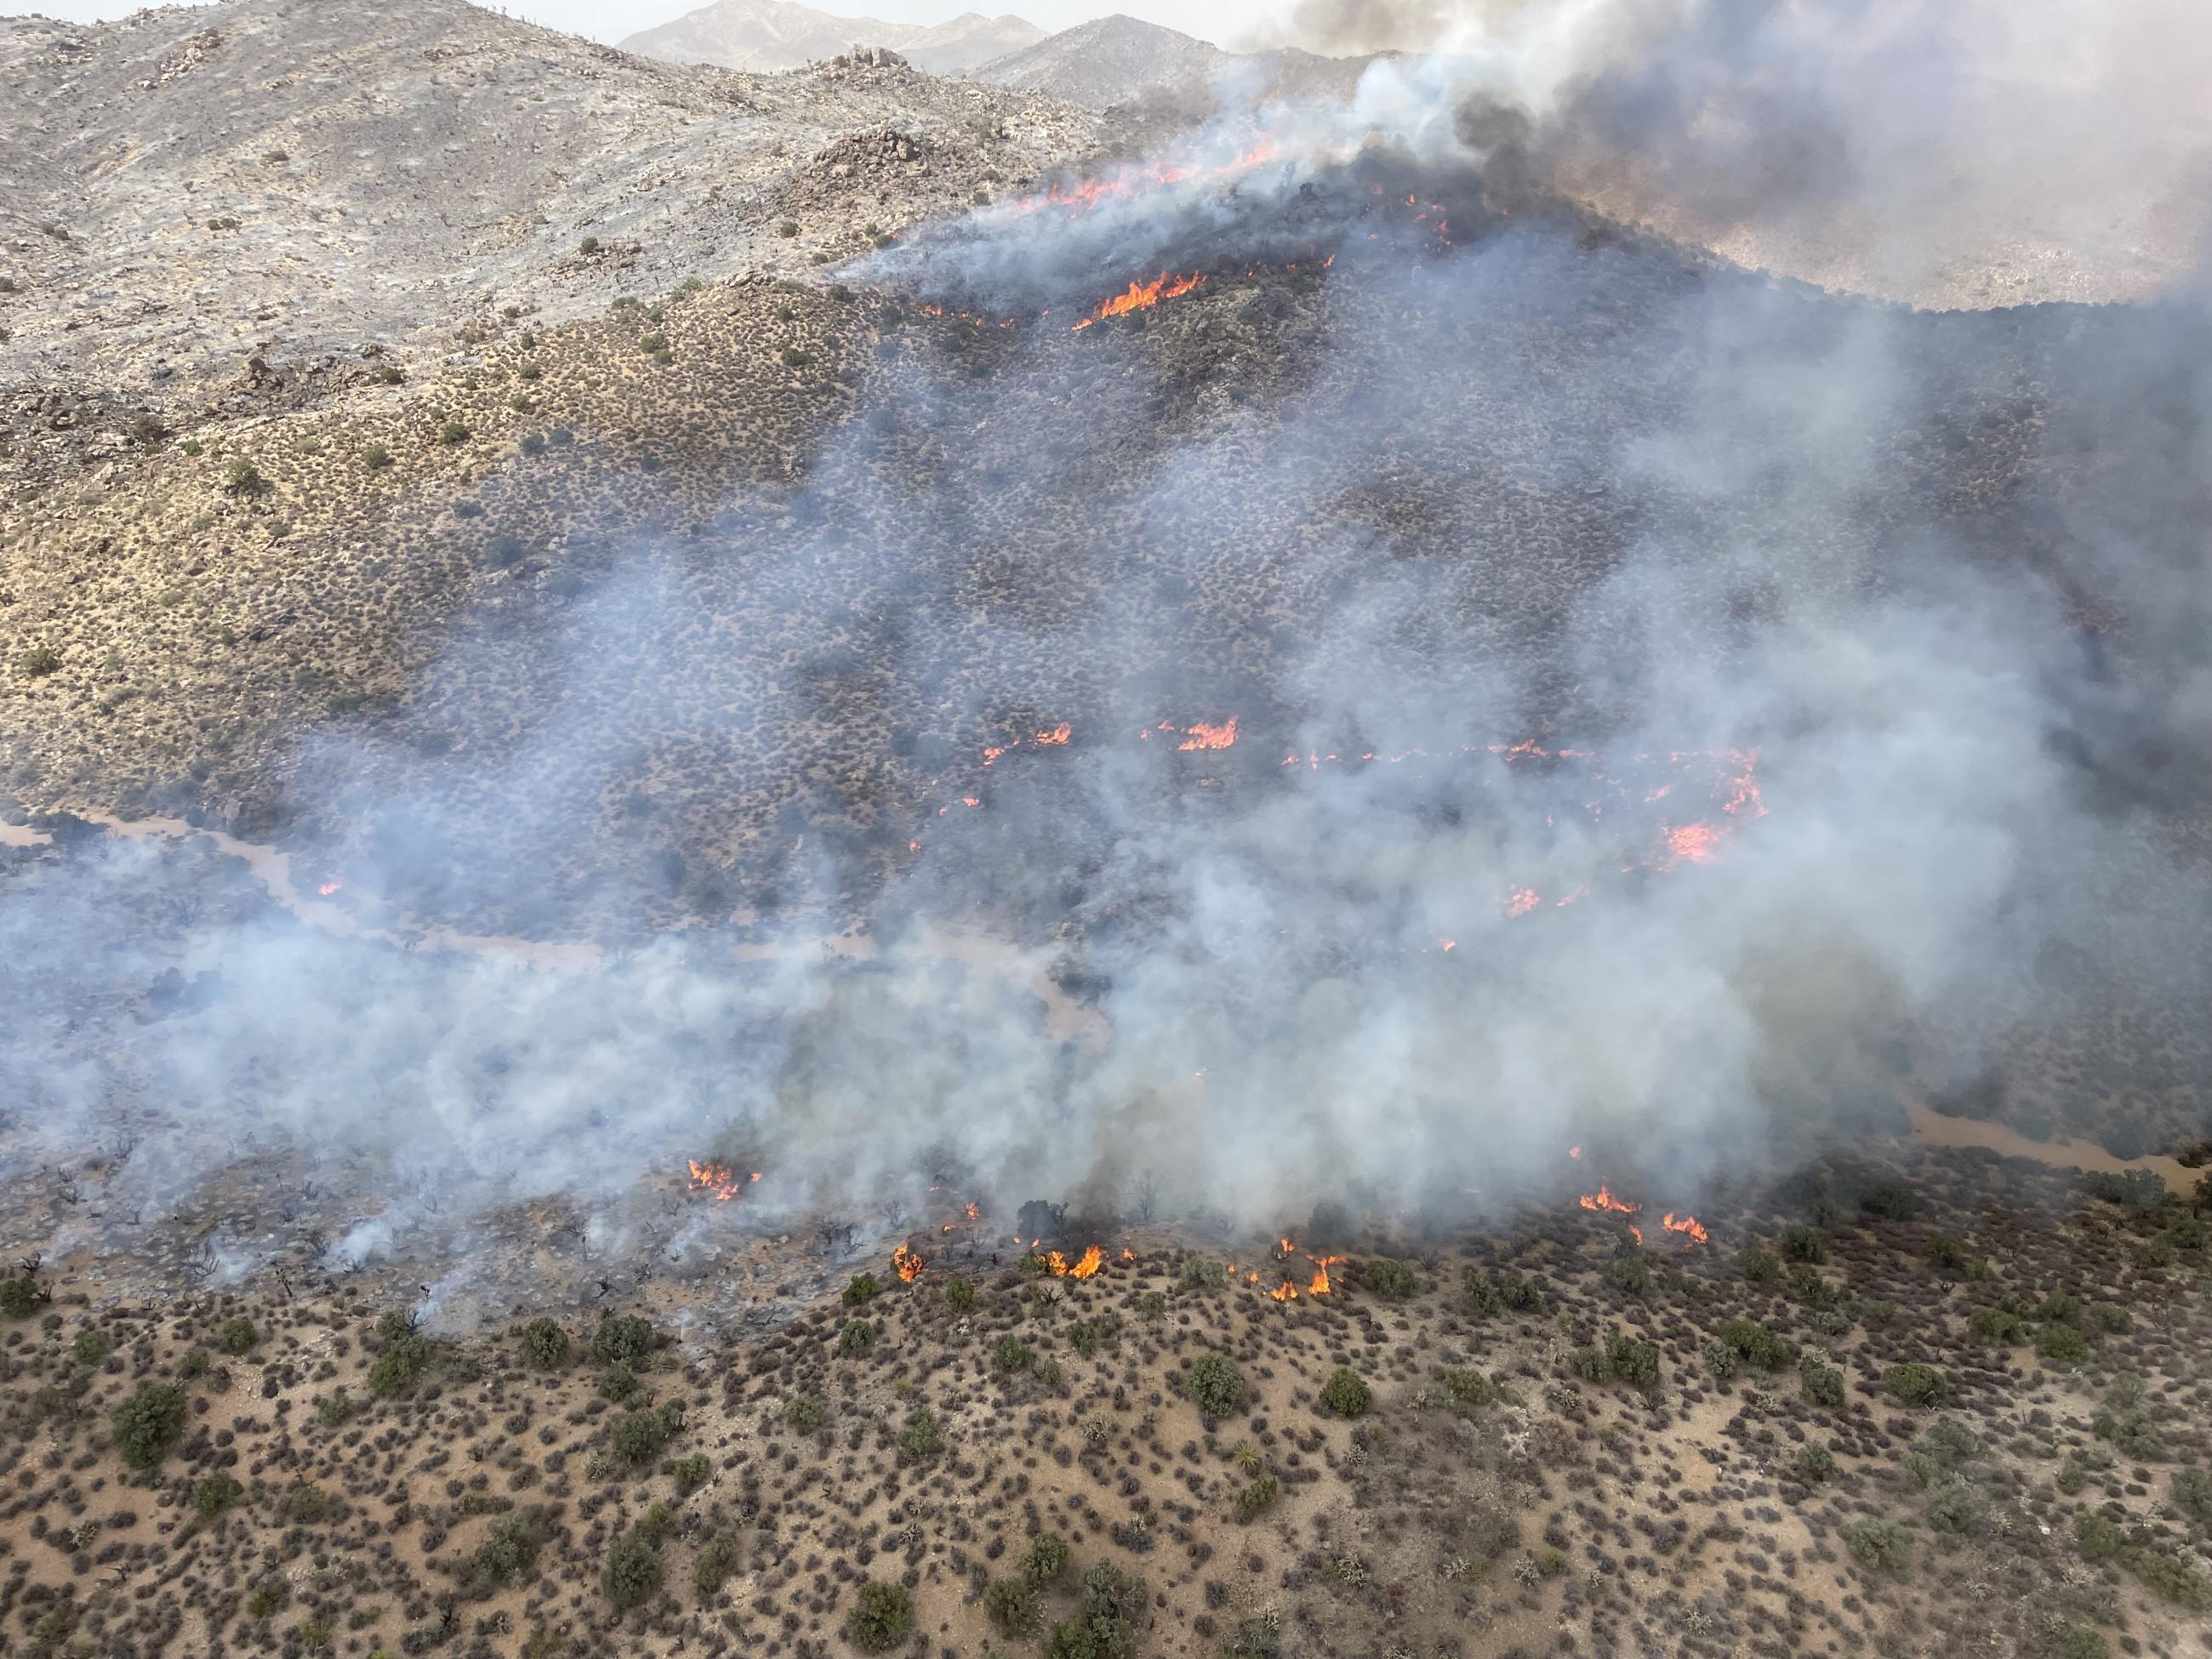 Image shows smoke and flames rising from a grassy desert hillside.